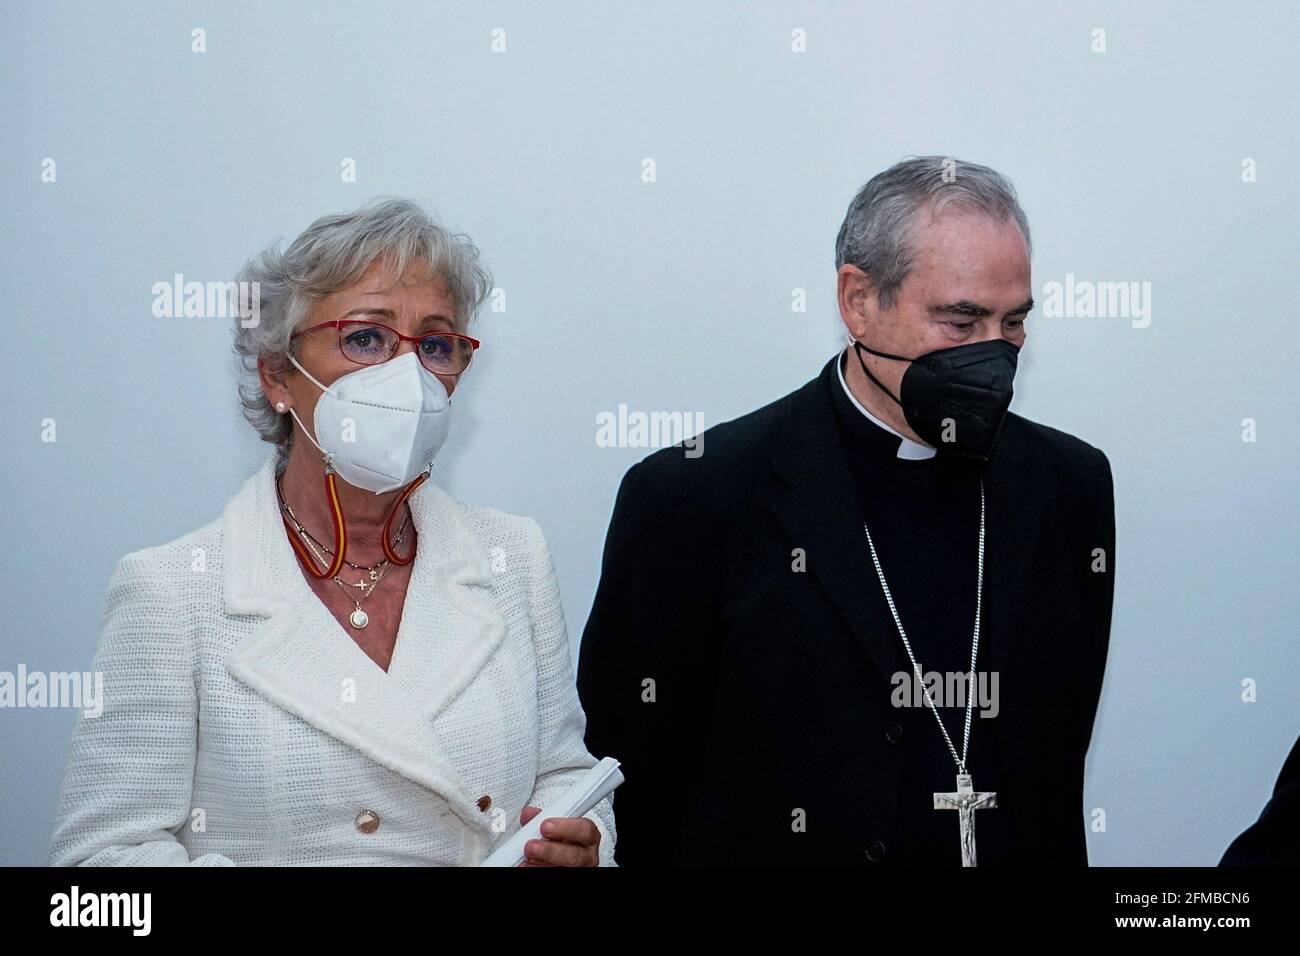 Malaga, Spain. 07th May, 2021. Council of Malaga City Hall, Teresa Porras and Malaga Bishop, Jesus Catala Ibañez seen during the exhibition at Centro Cultural Fundacion Unicaja.'Un siglo de esplendor' is an exhibition that shows the artistic heritage of the Holy Week brotherhoods of Malaga and is one of the events organized by Agrupacion de Cofradias de Semana Santa de Malaga for the centenary of the institution. (Photo by Francis Gonzalez/SOPA Images/Sipa USA) Credit: Sipa USA/Alamy Live News Stock Photo